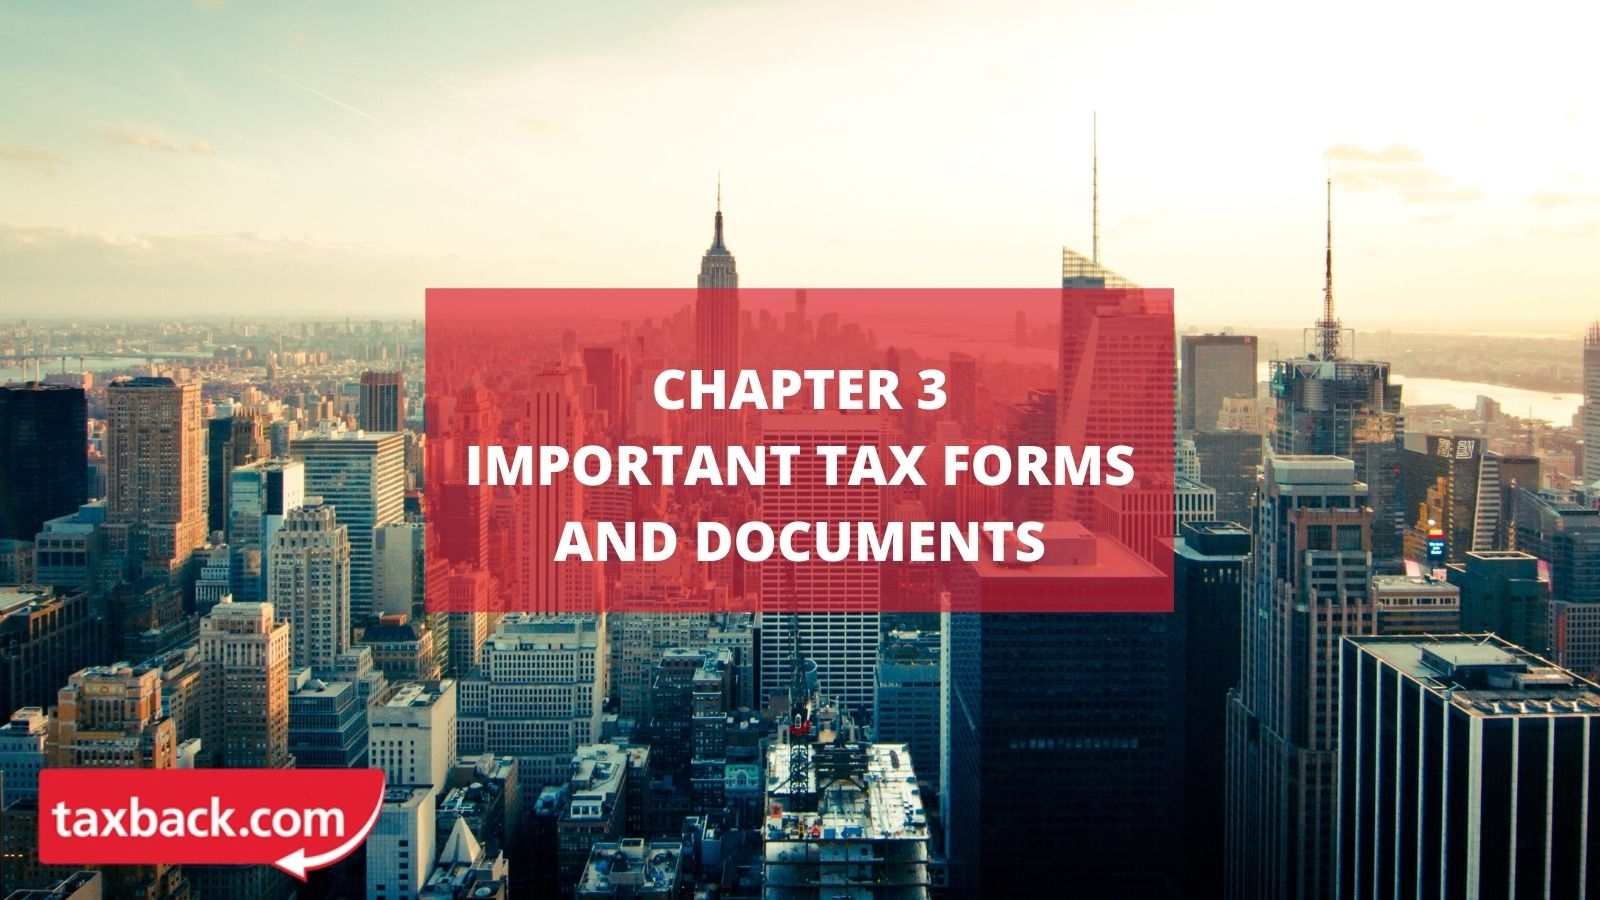 Chapter 3: Important Tax Forms and Documents